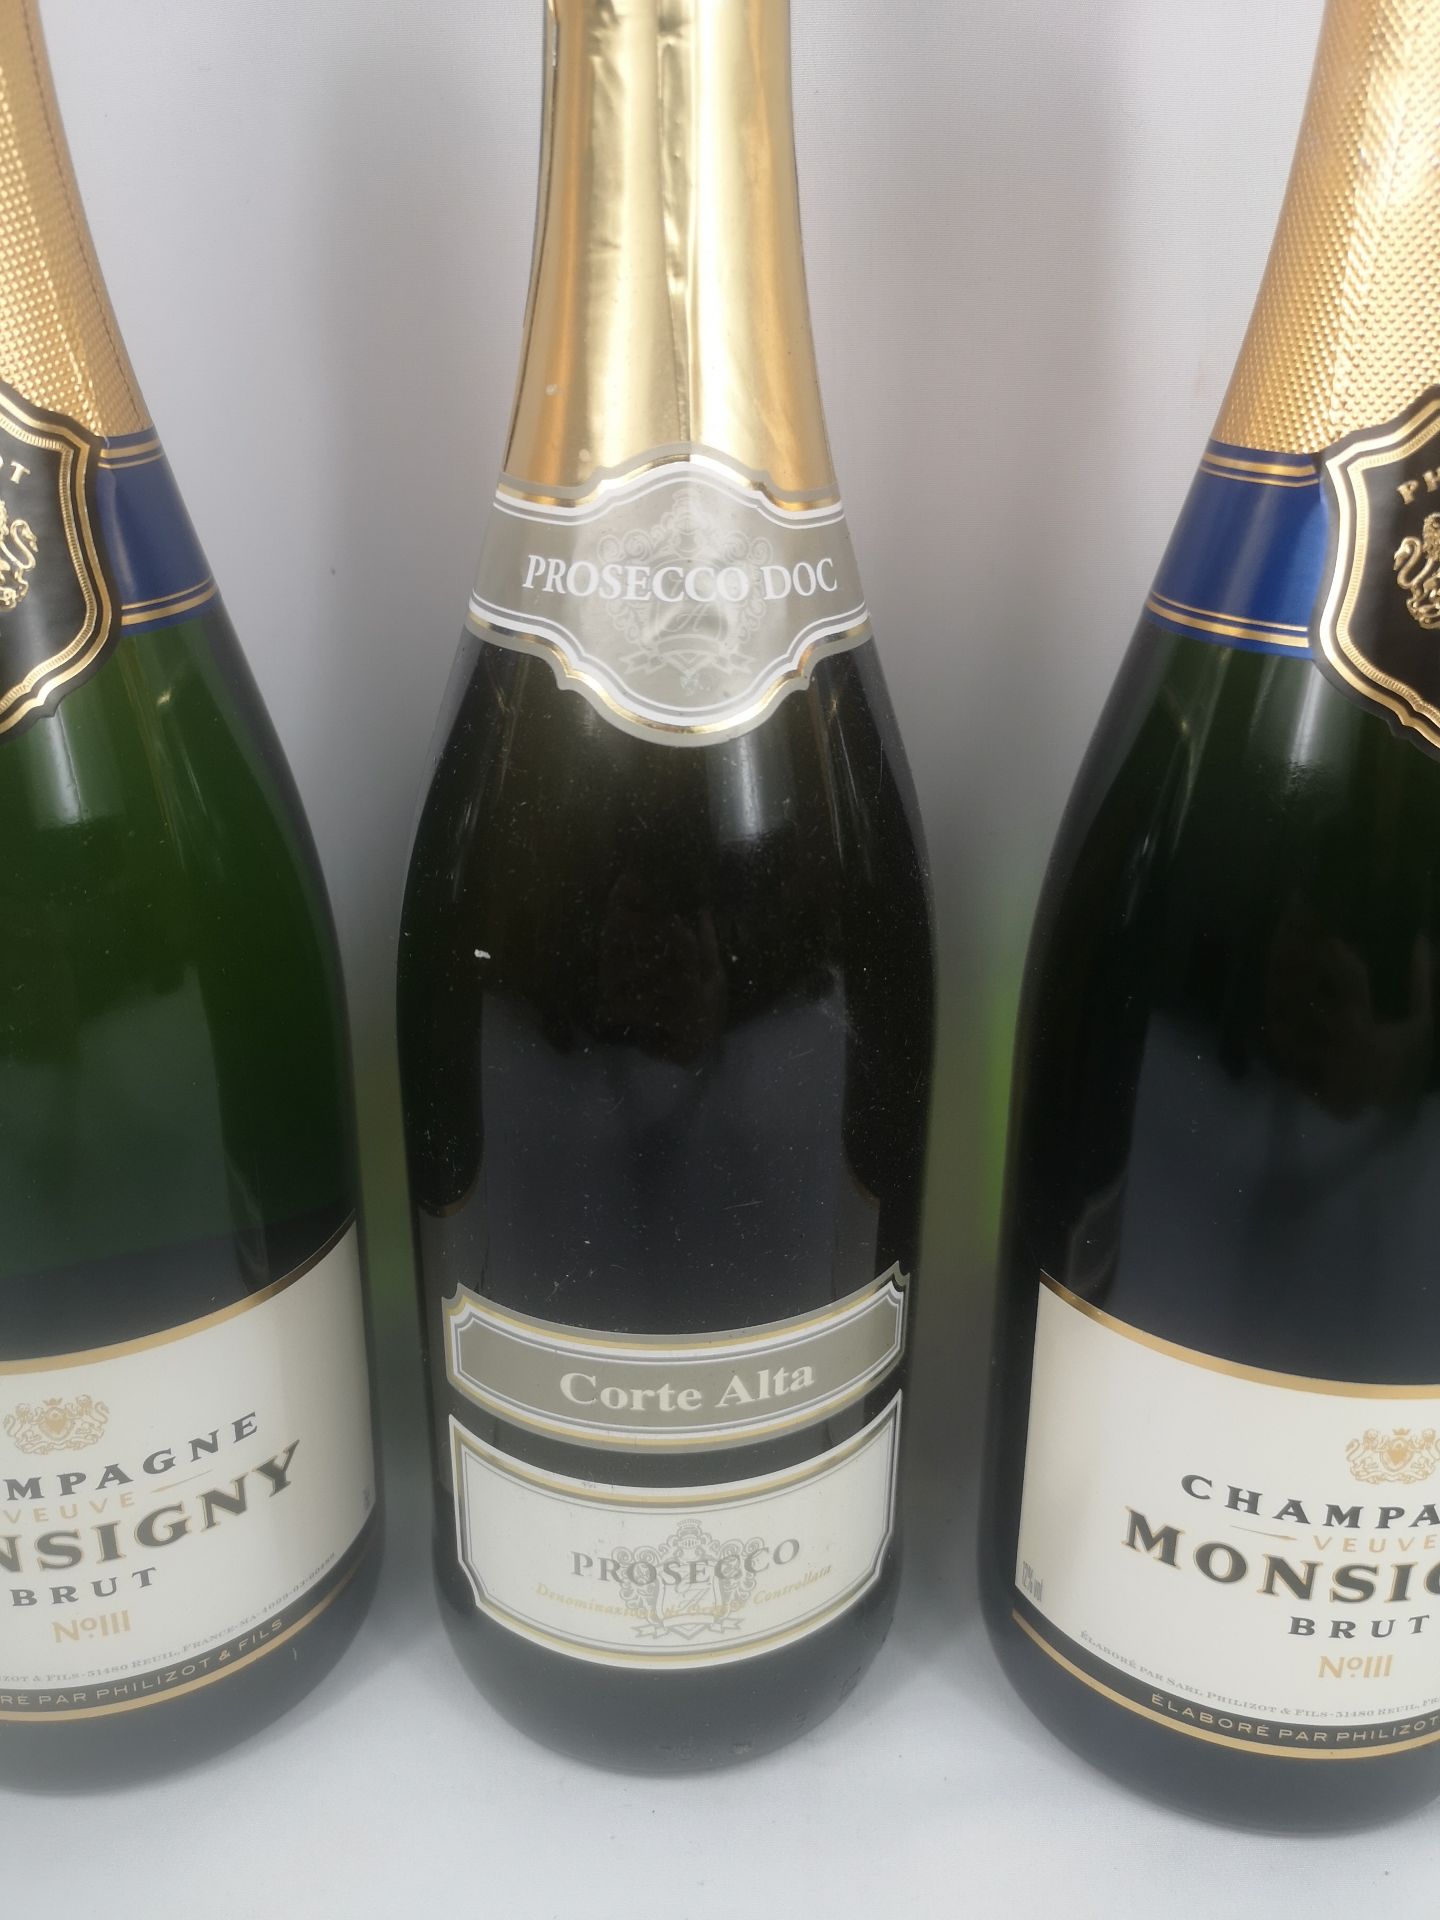 Five 75cl bottles of Monsigny Brut together with a 75cl bottle of Corte Alta Prosecco - Image 3 of 6